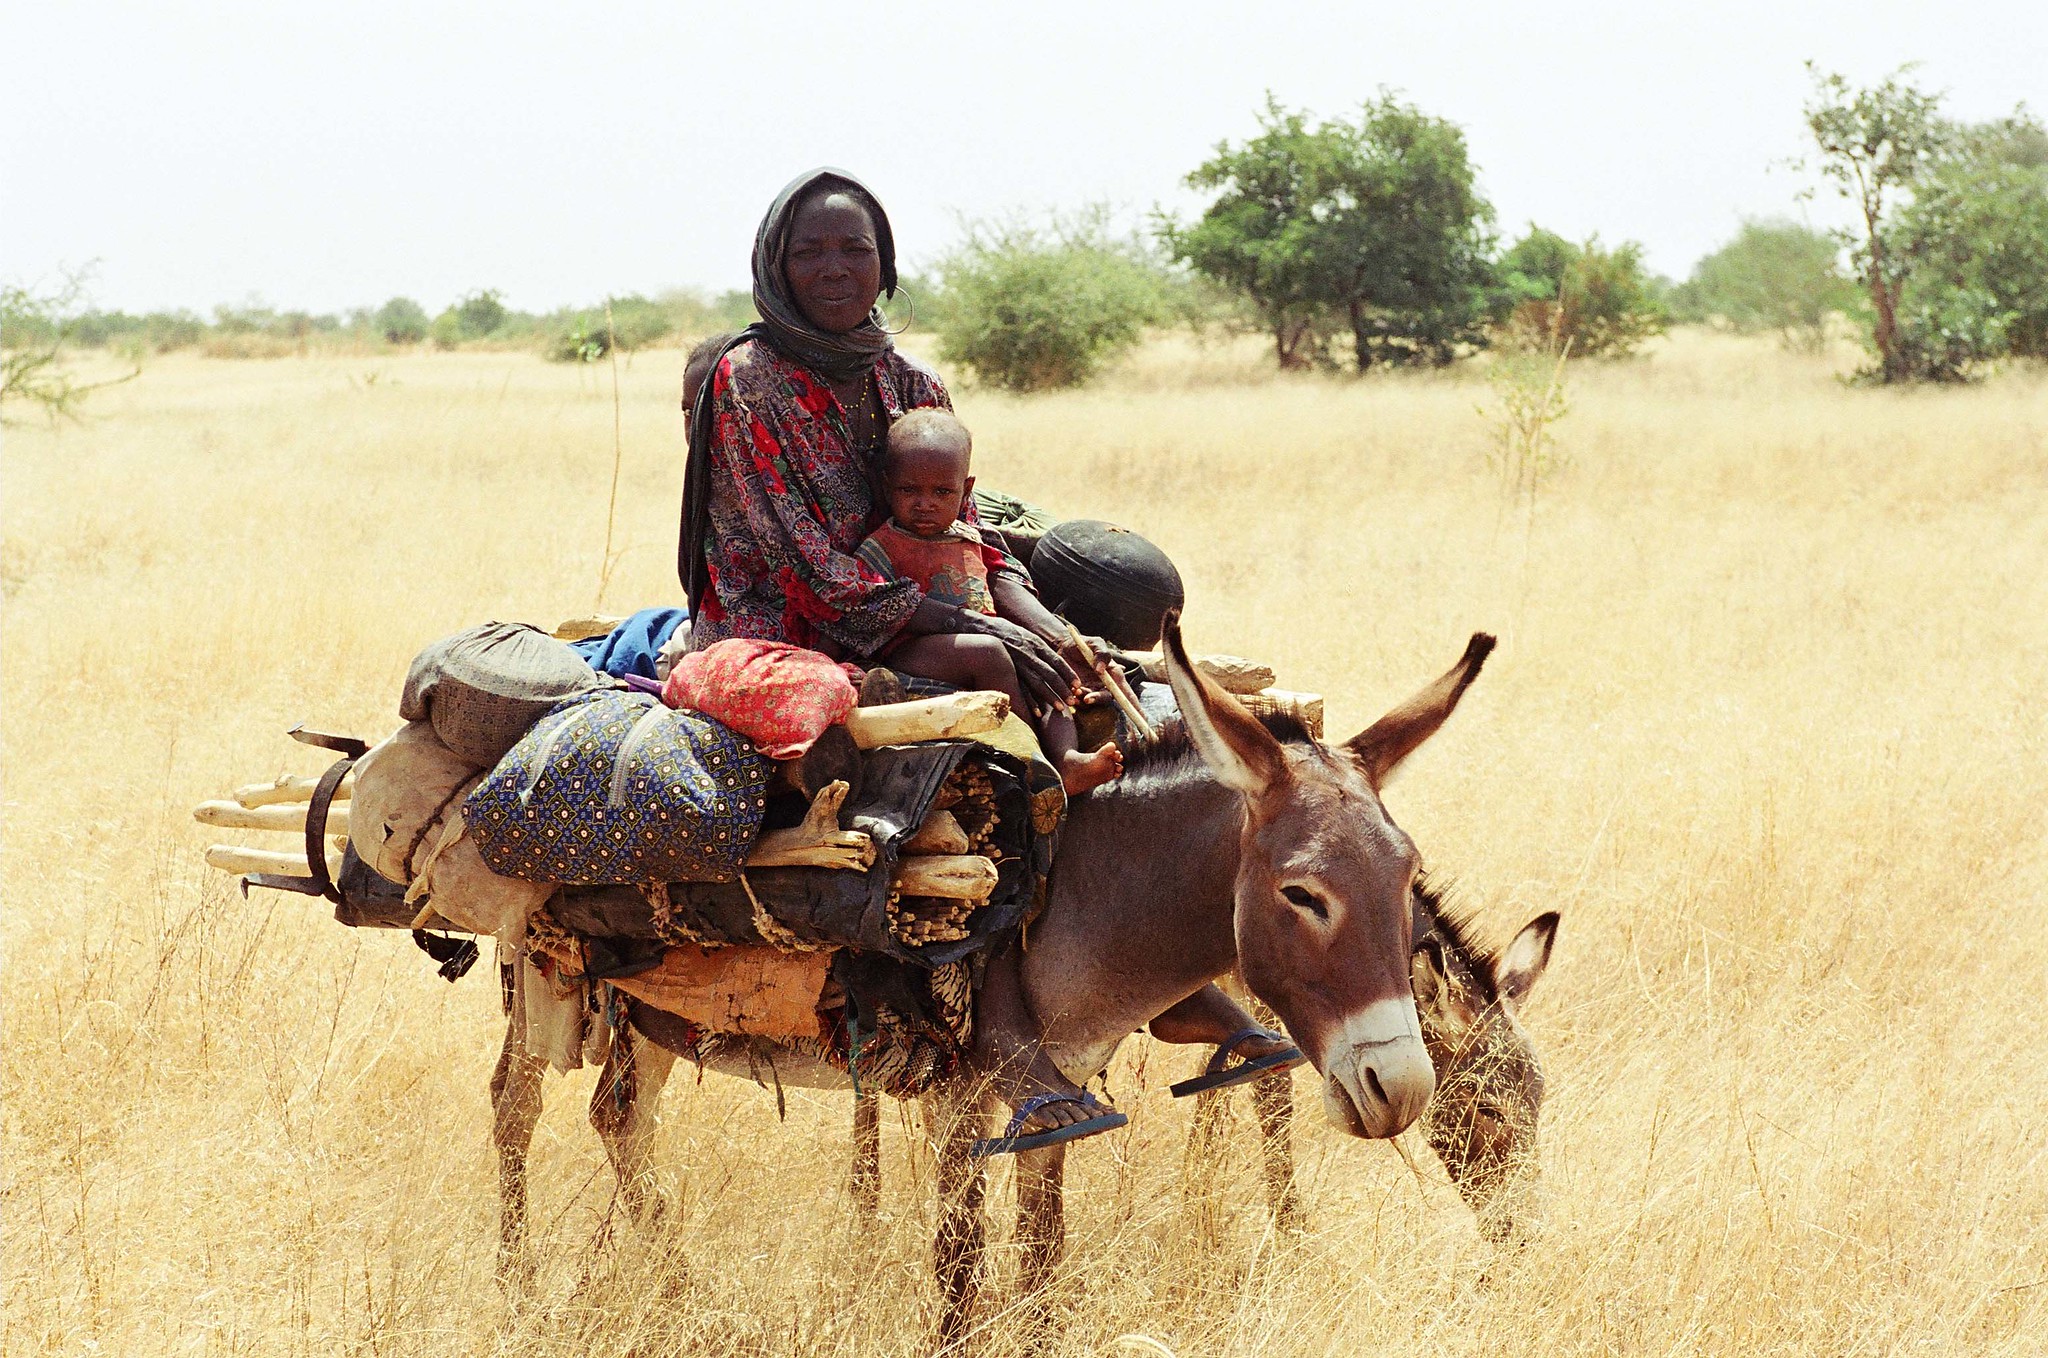 Lady with a child on heavily laden donkey eating dried grass in a field with small green trees in the background